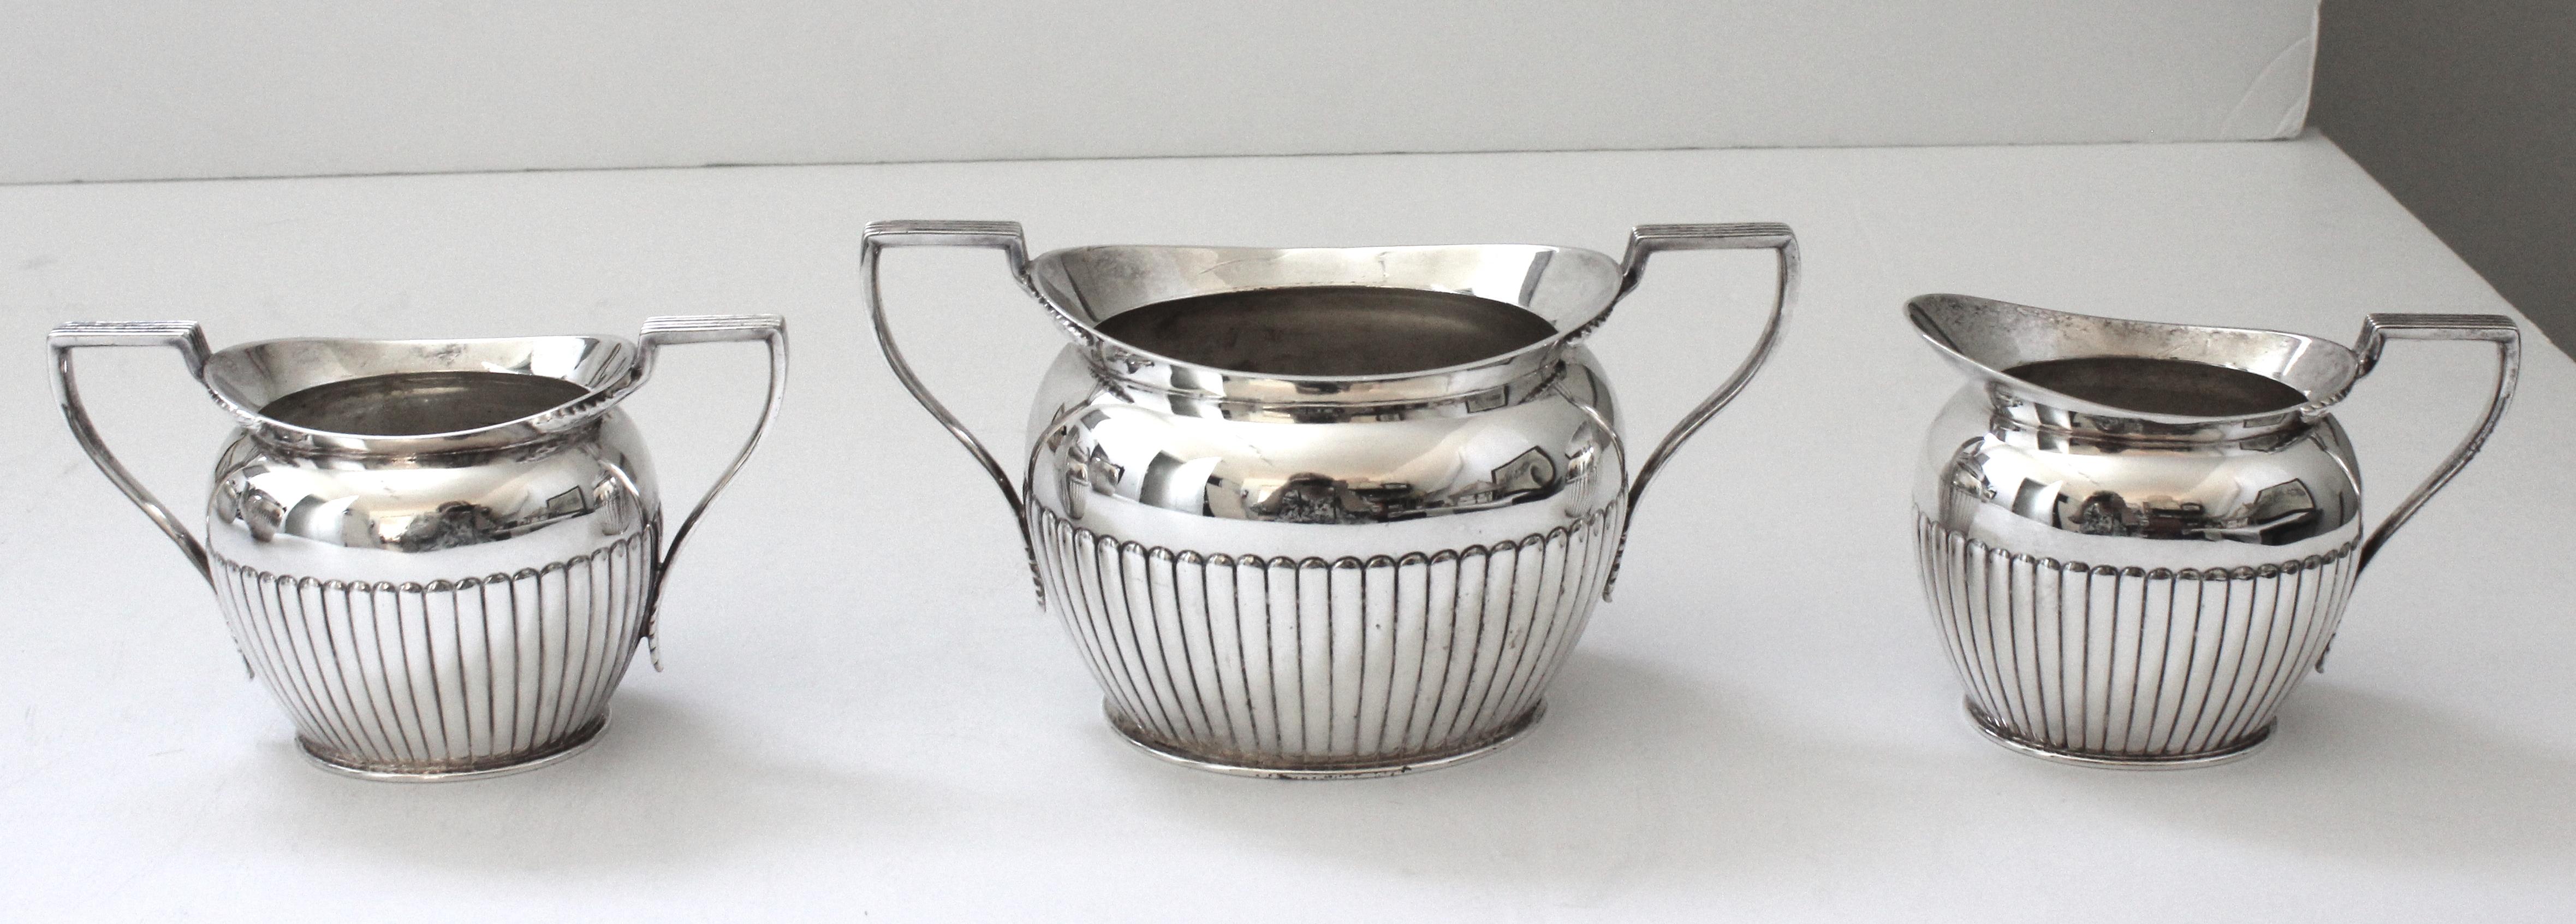 Silver Plate Hukin & Heath Silversmiths Coffee and Tea Service For Sale